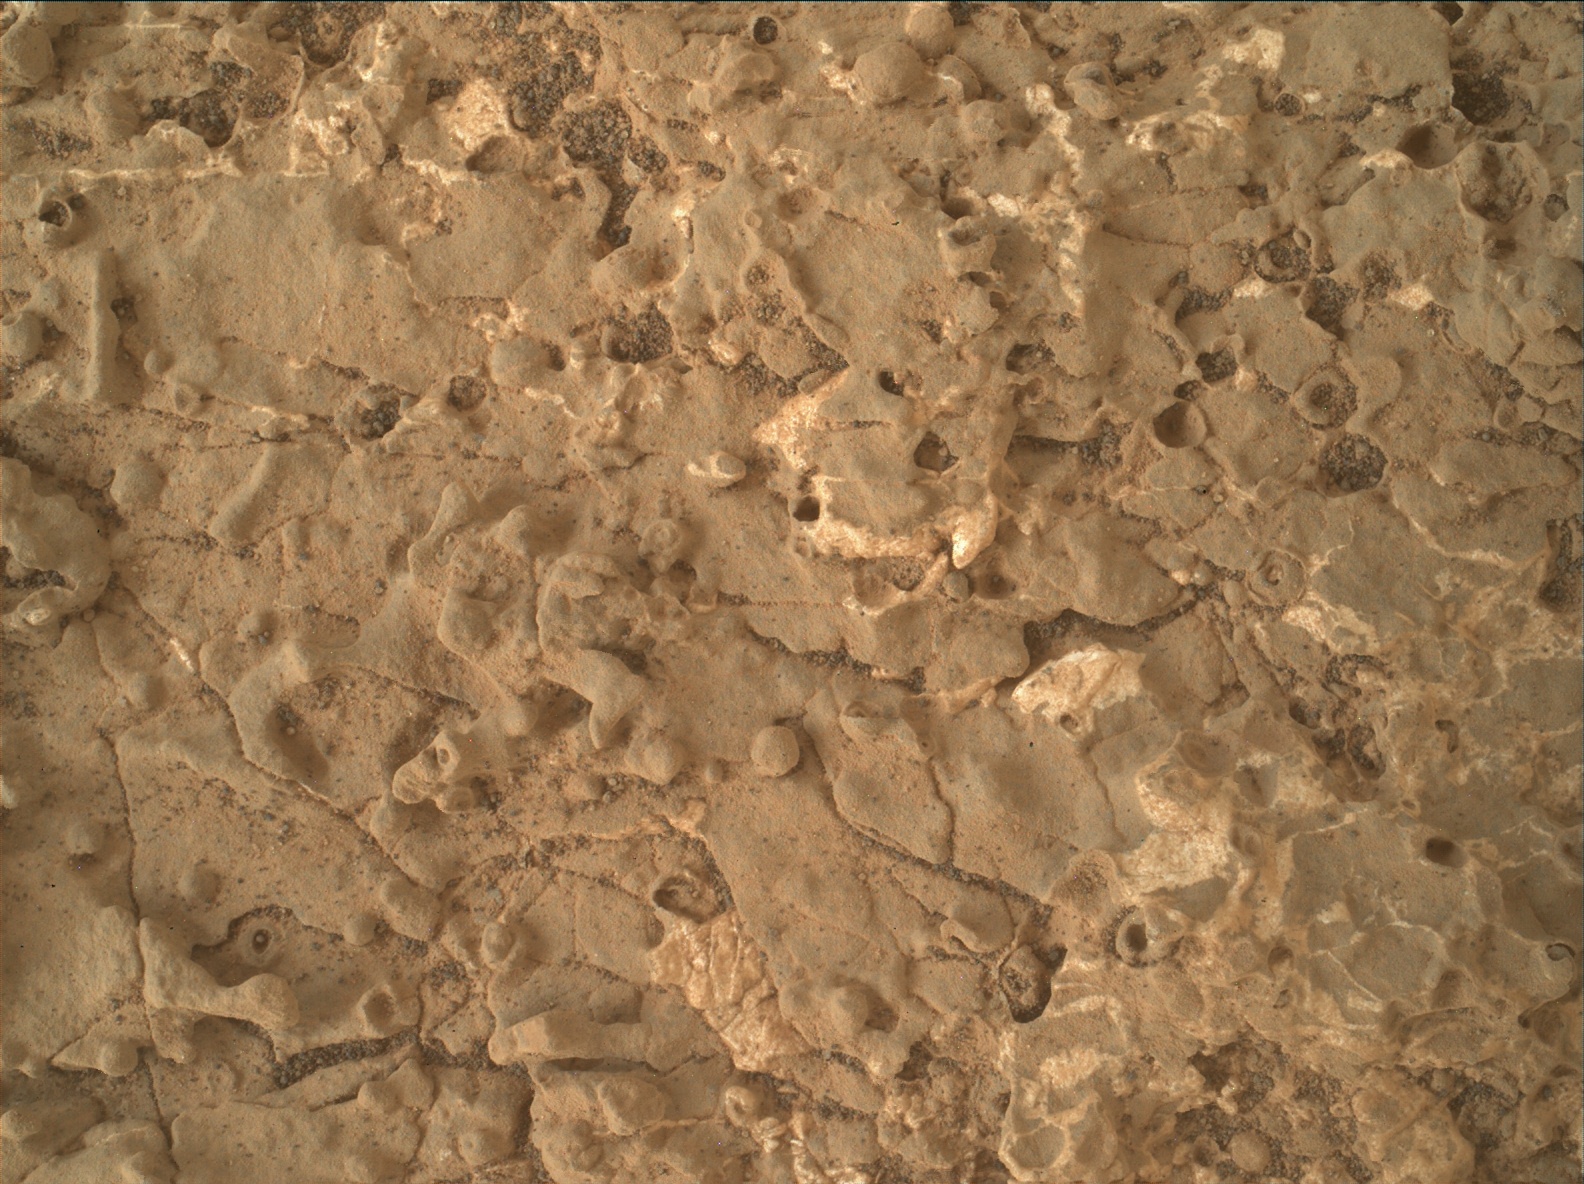 Nasa's Mars rover Curiosity acquired this image using its Mars Hand Lens Imager (MAHLI) on Sol 2661